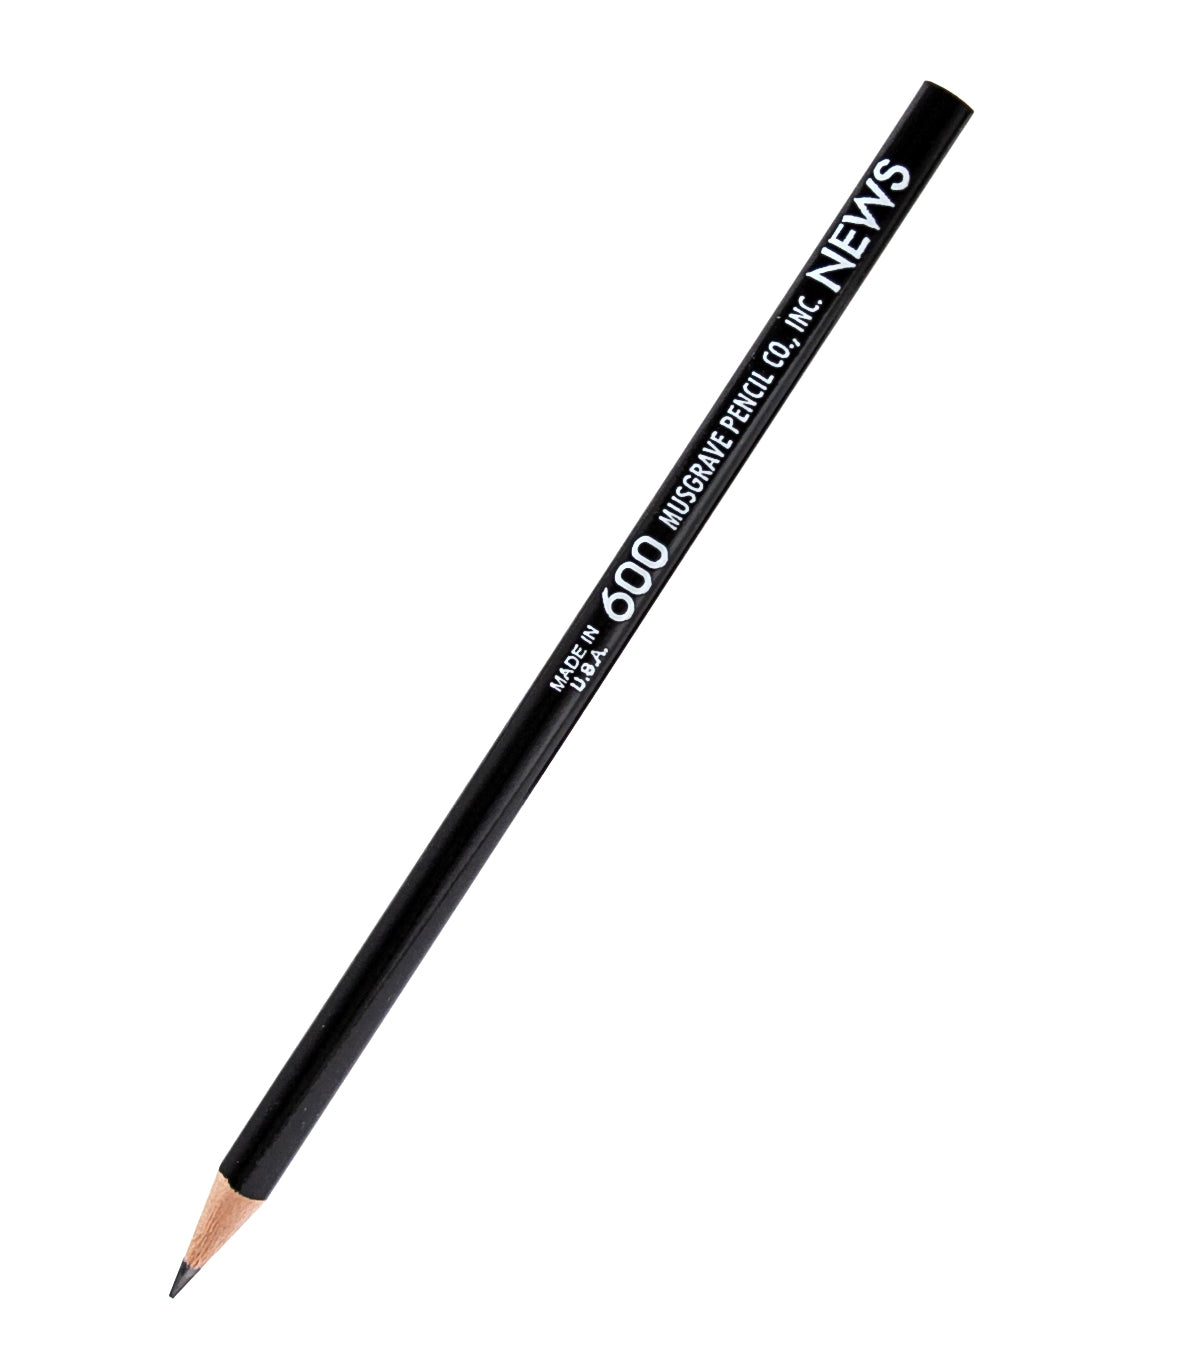 600 News | Round Pencil | Musgrave Pencil Company by Musgrave Pencil Company